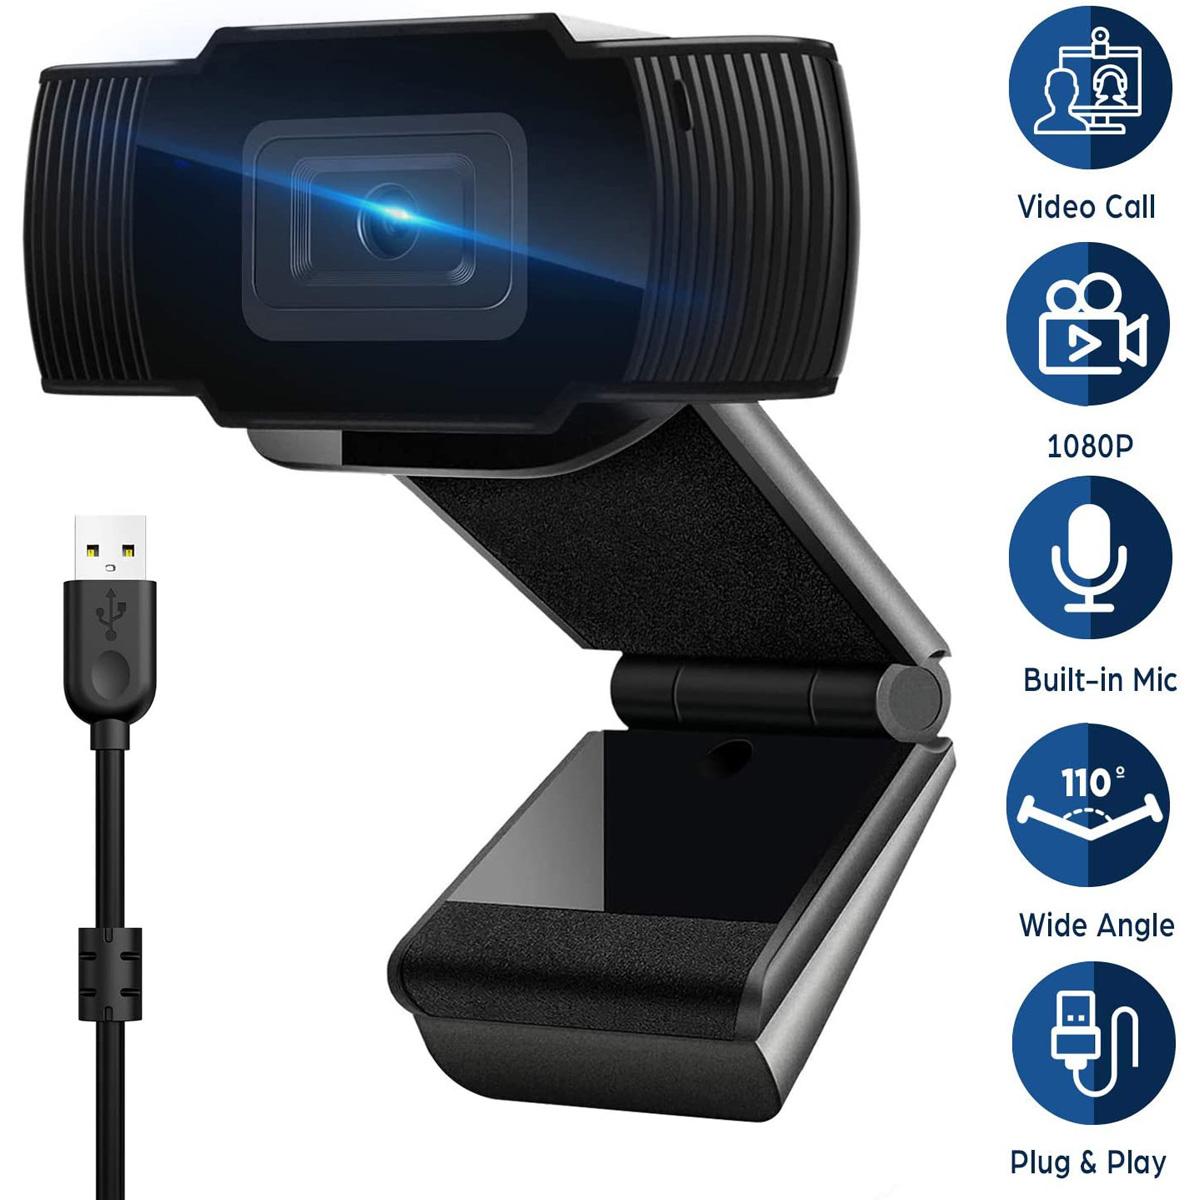 Zoom and Skype Autofocus Webcam with Microphone for $9.99 Shipped